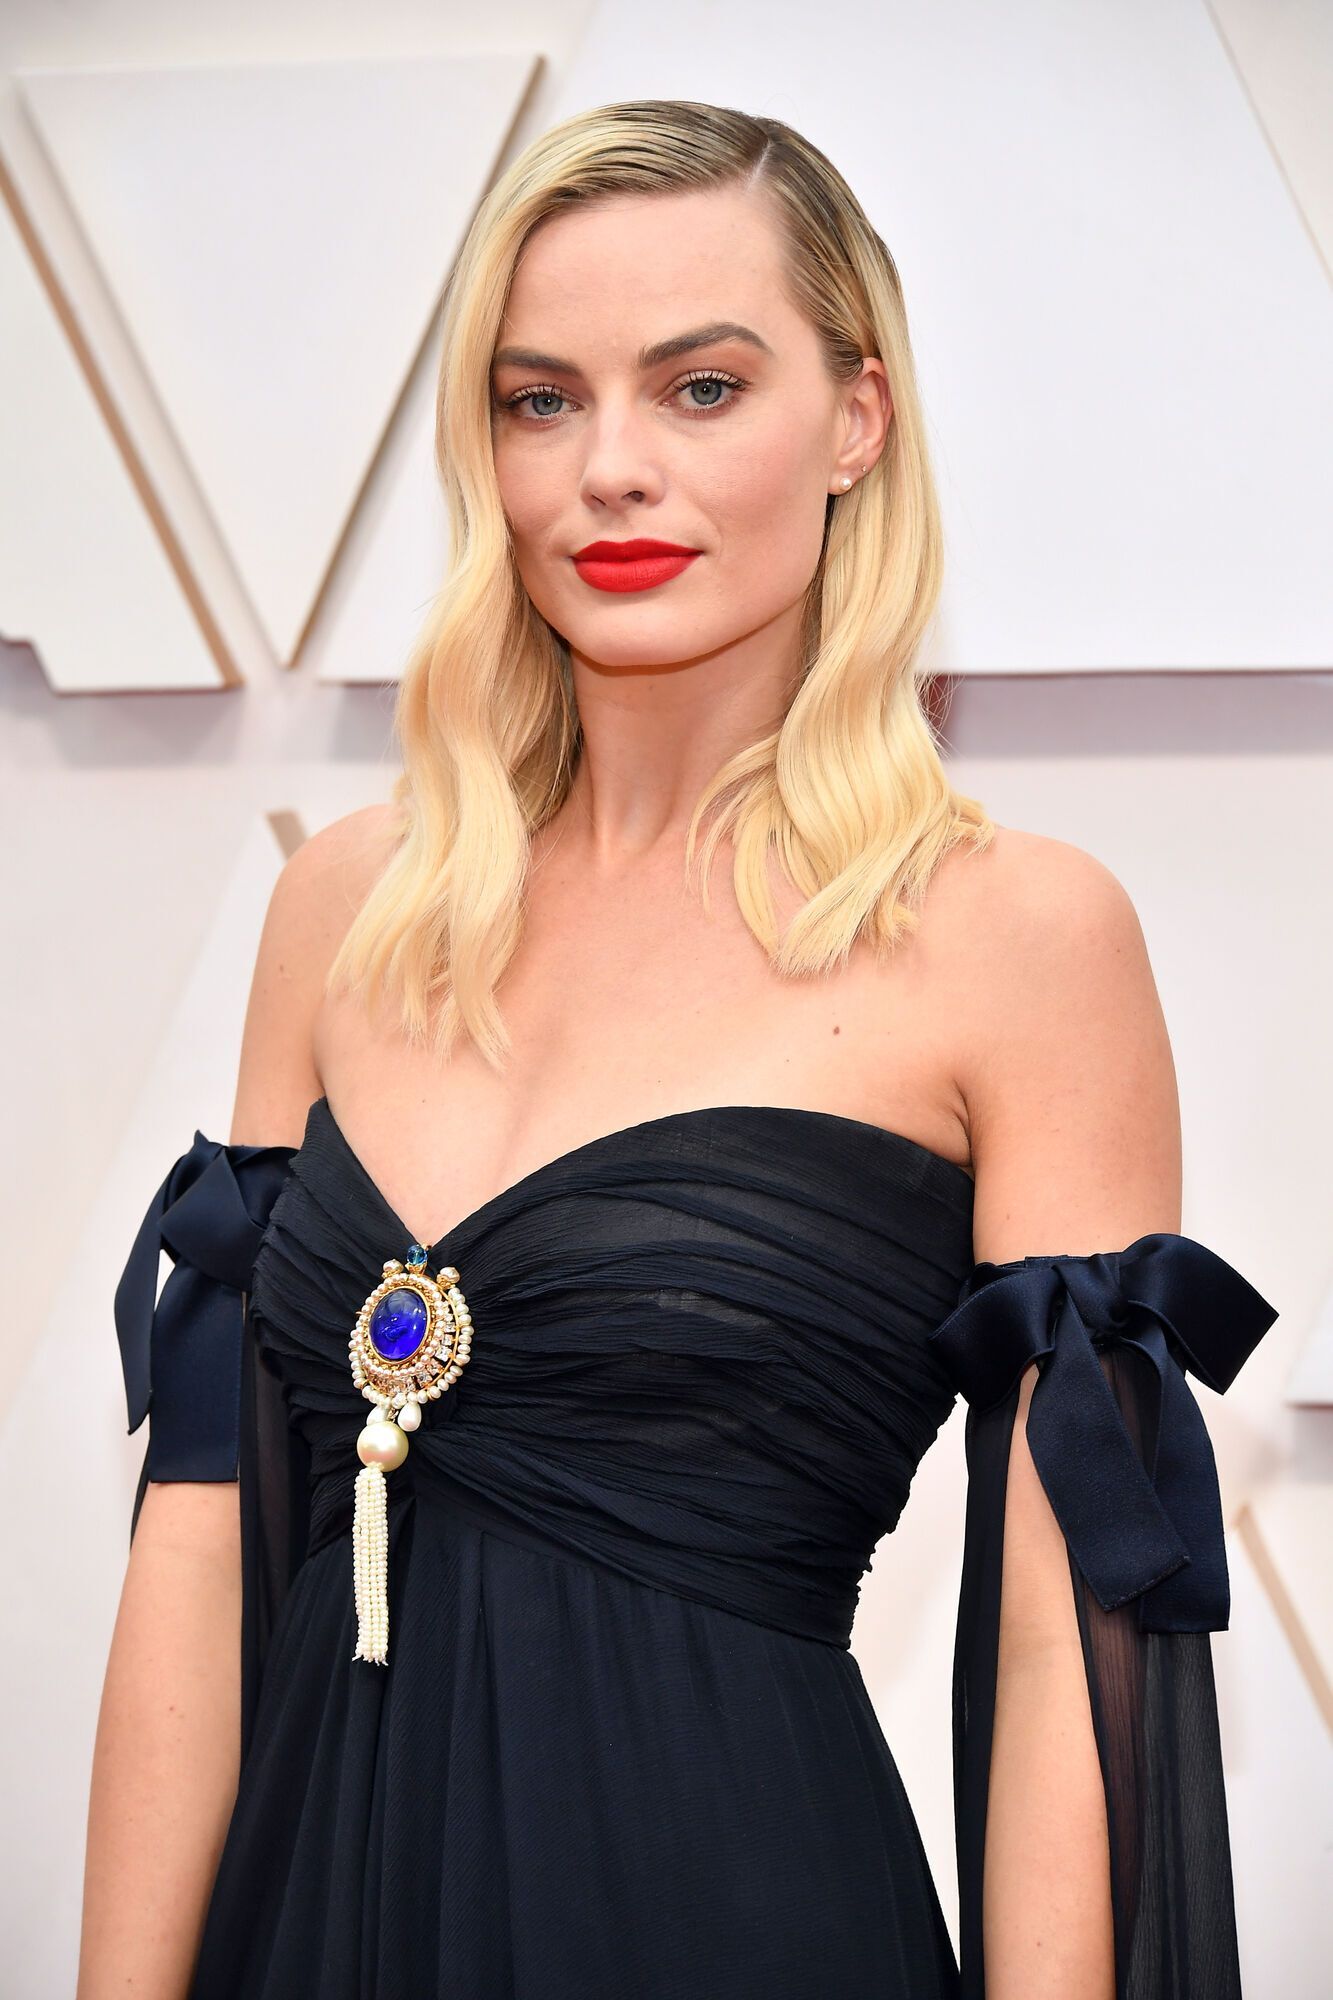 From spectacular brunette to blonde Barbie: how Margot Robbie changed during her acting career